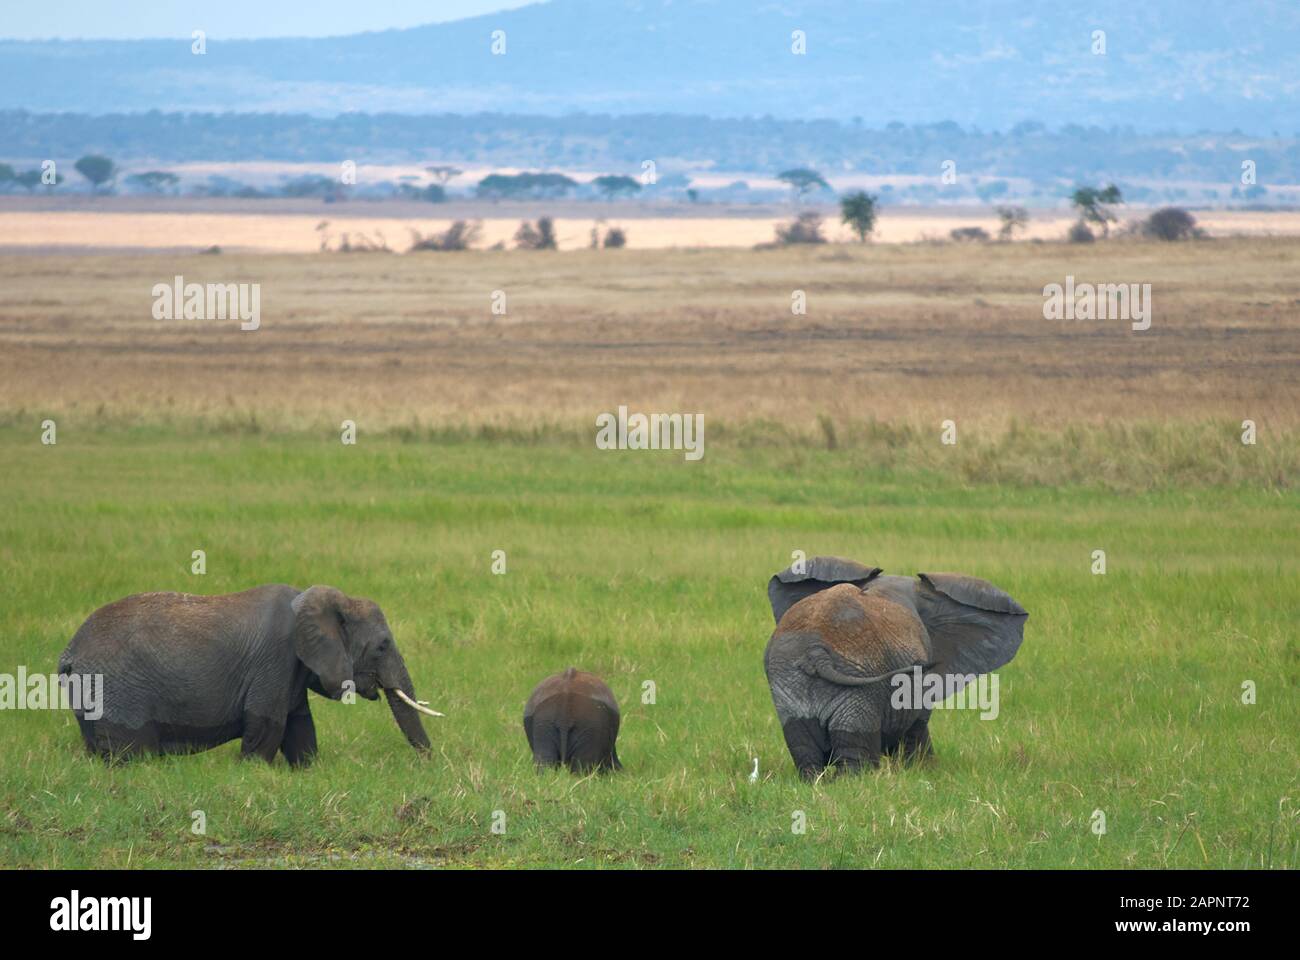 A herd of elephants romping around in a swamp Stock Photo